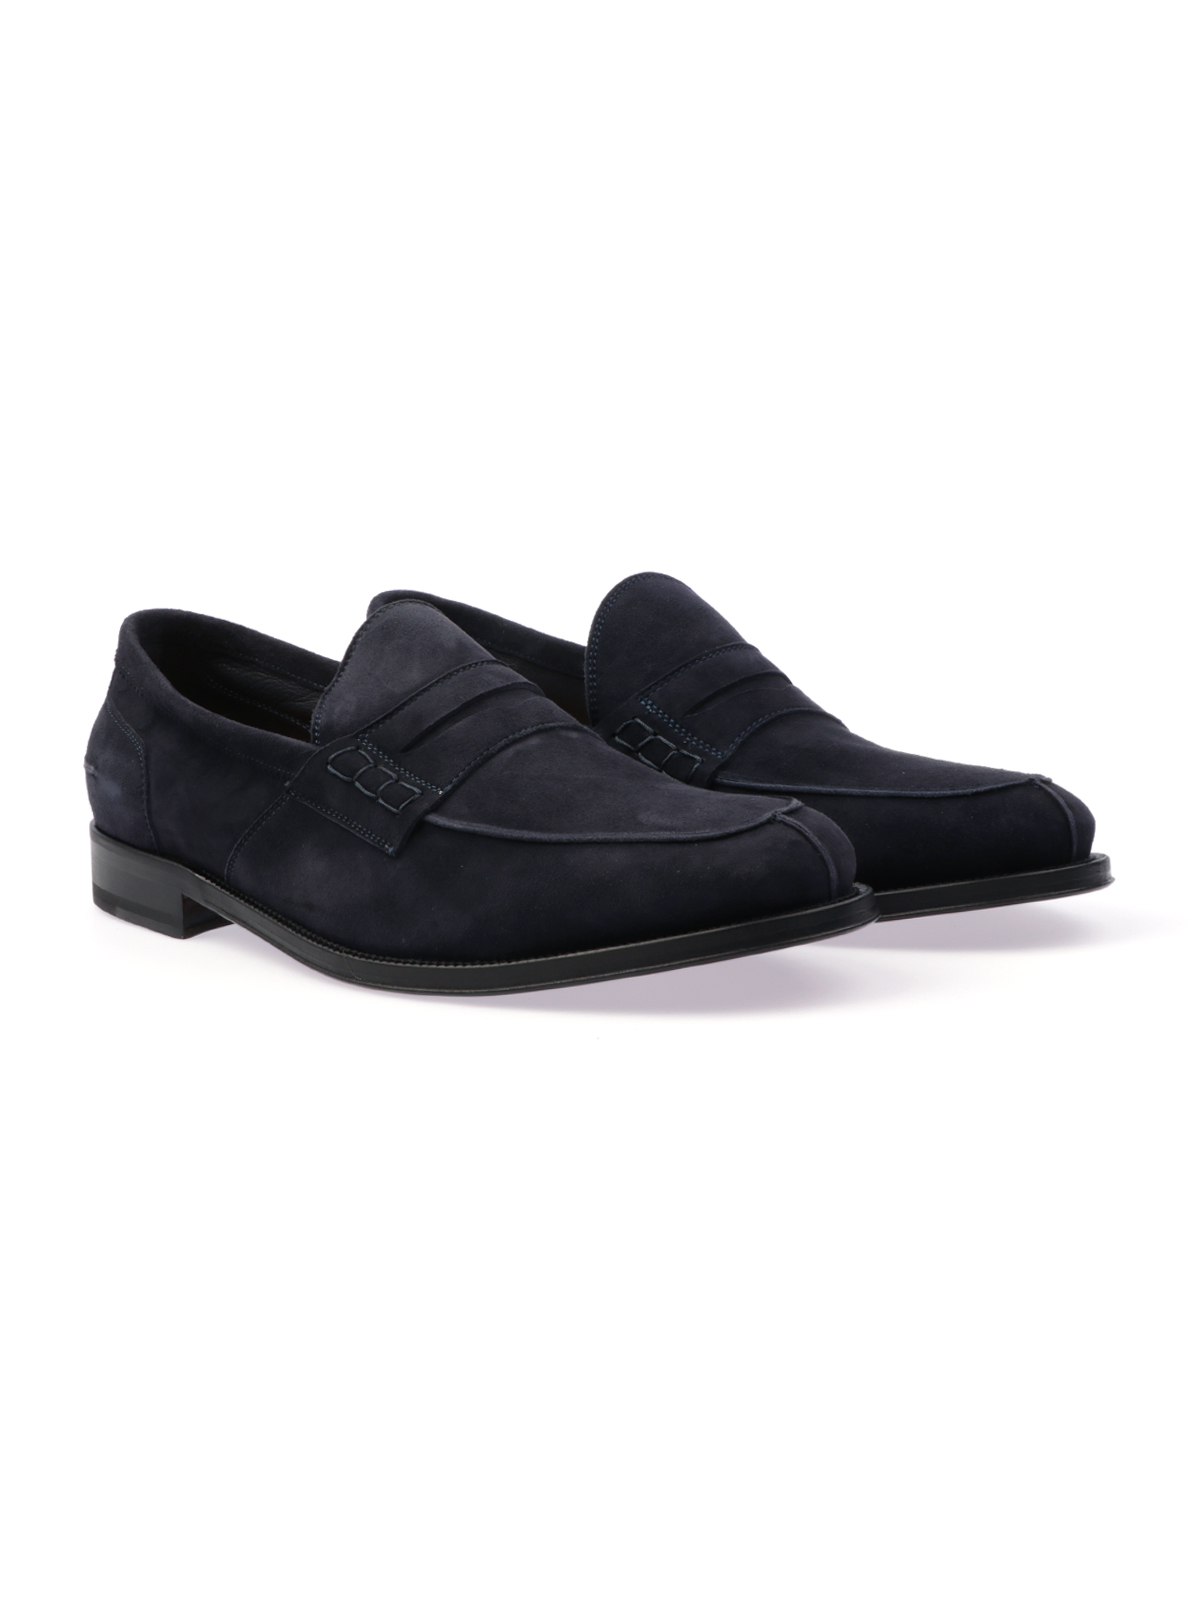 Picture of BOTTI | Men's Suede Unlined Loafer